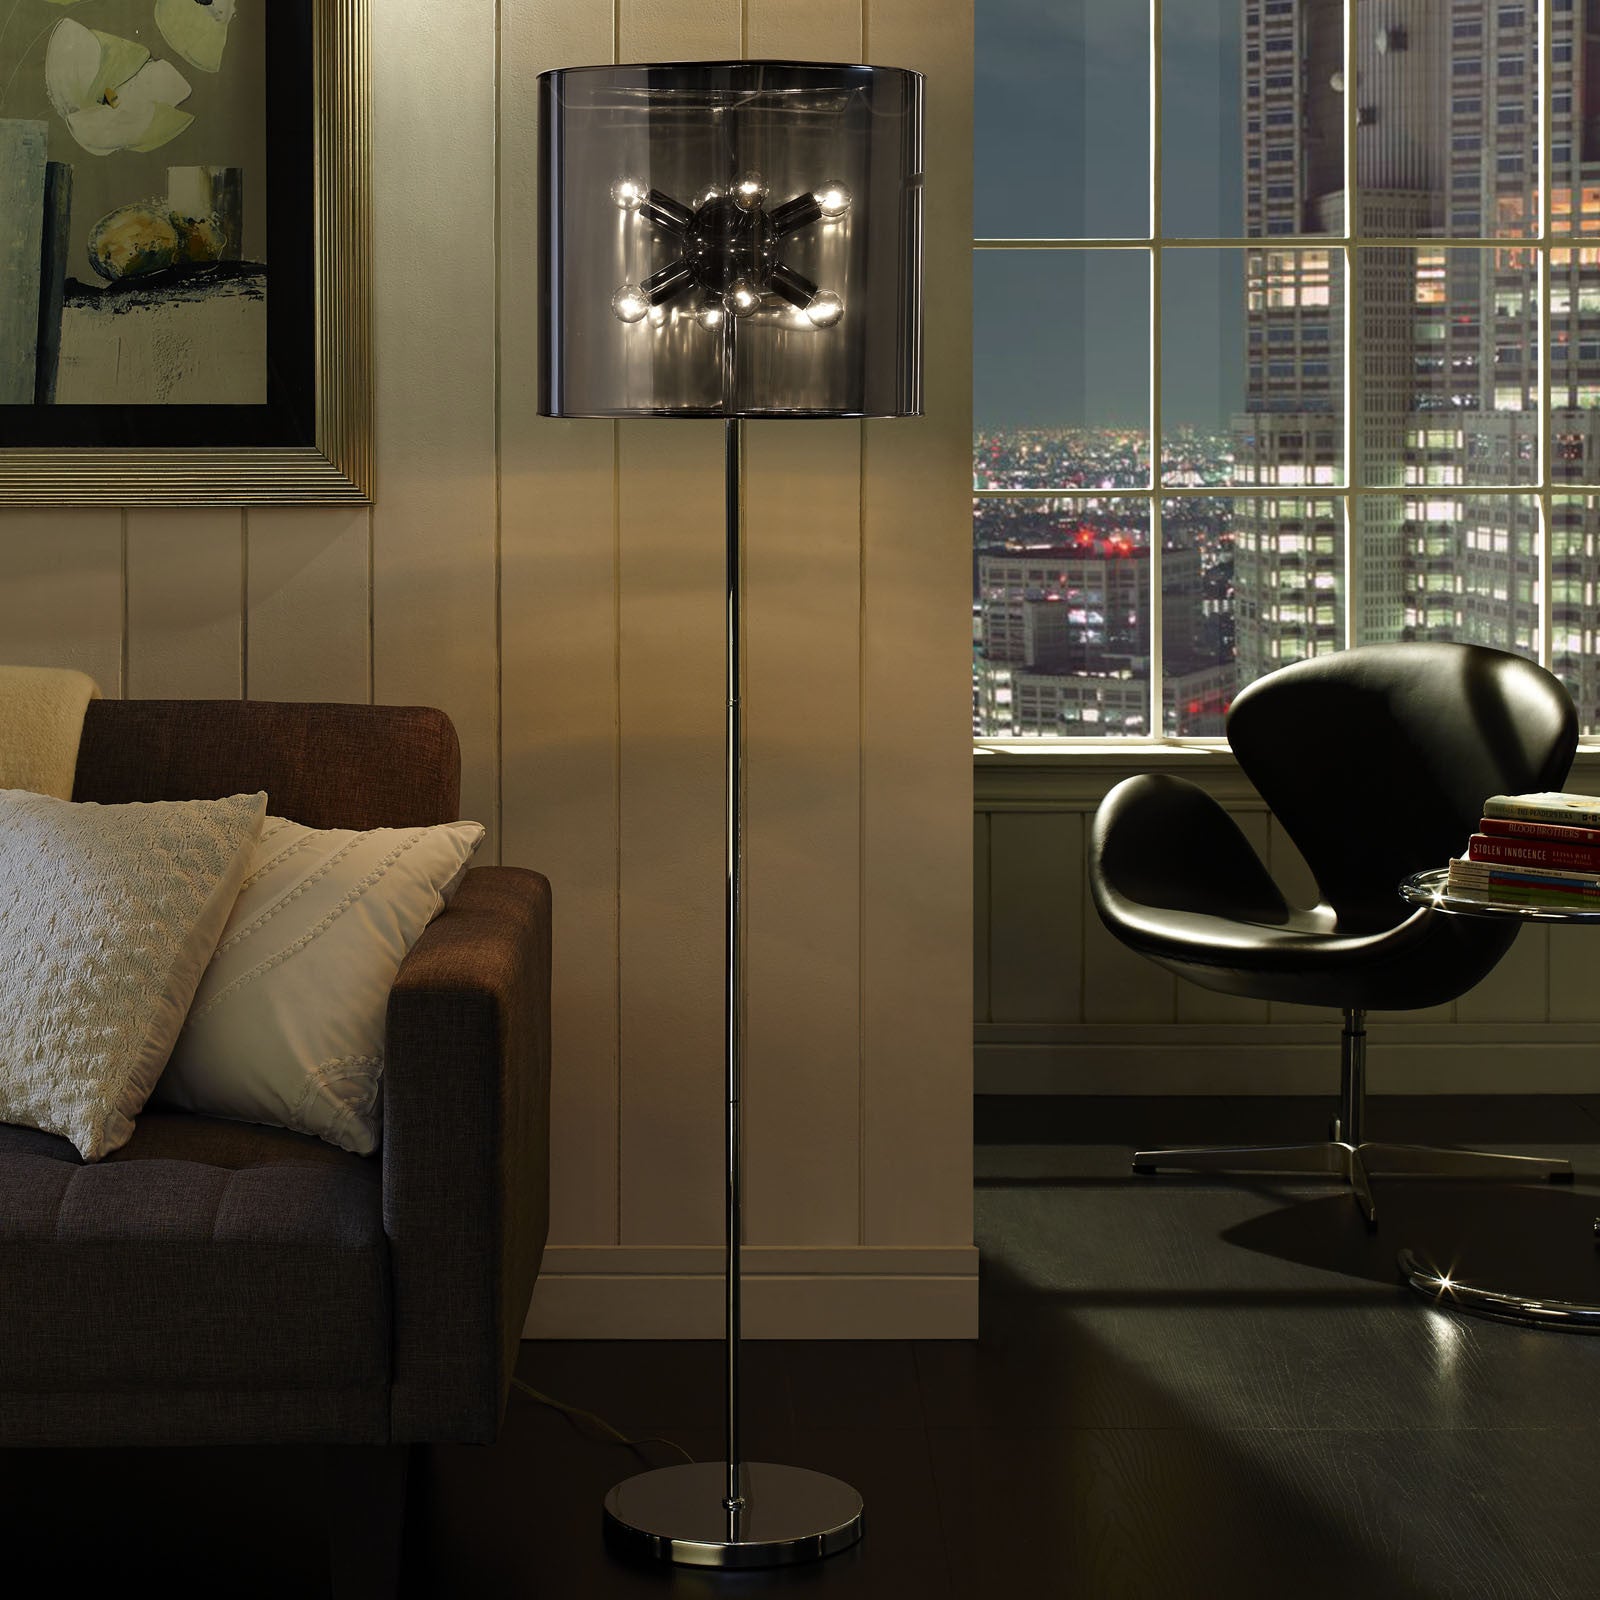 Ares Floor Lamp Silver